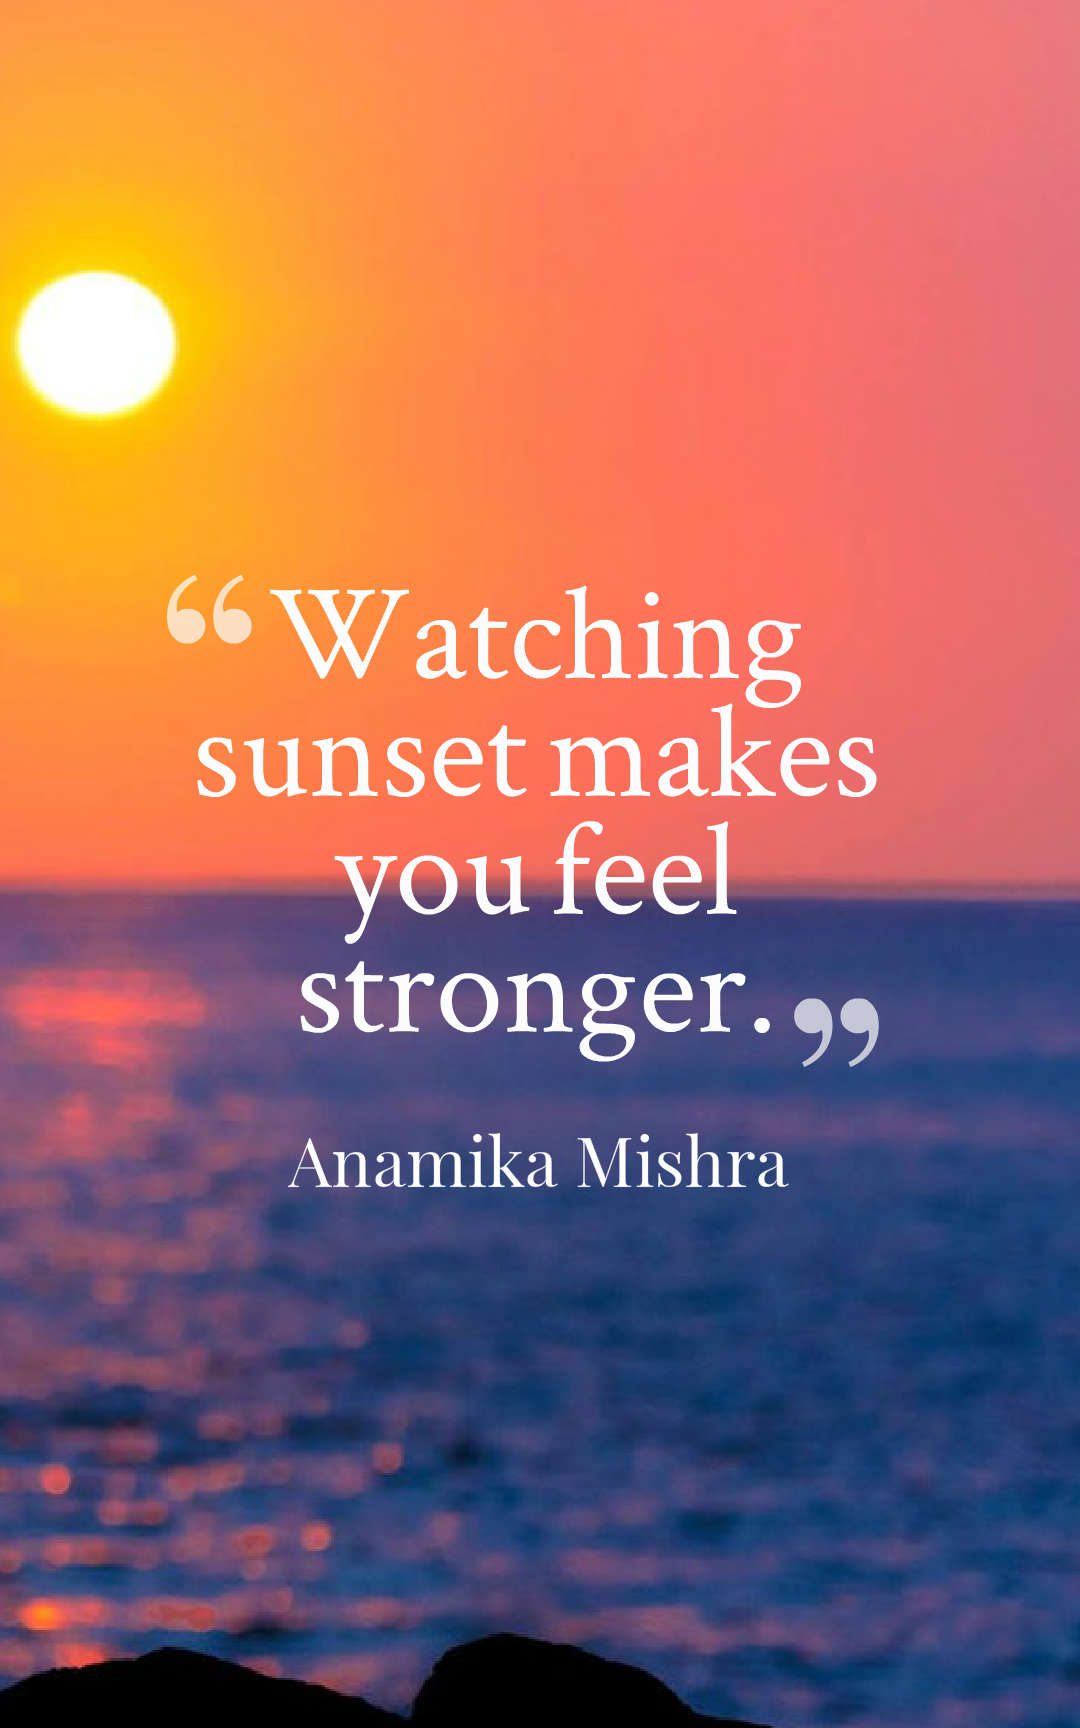 Watching sunset makes you feel stronger